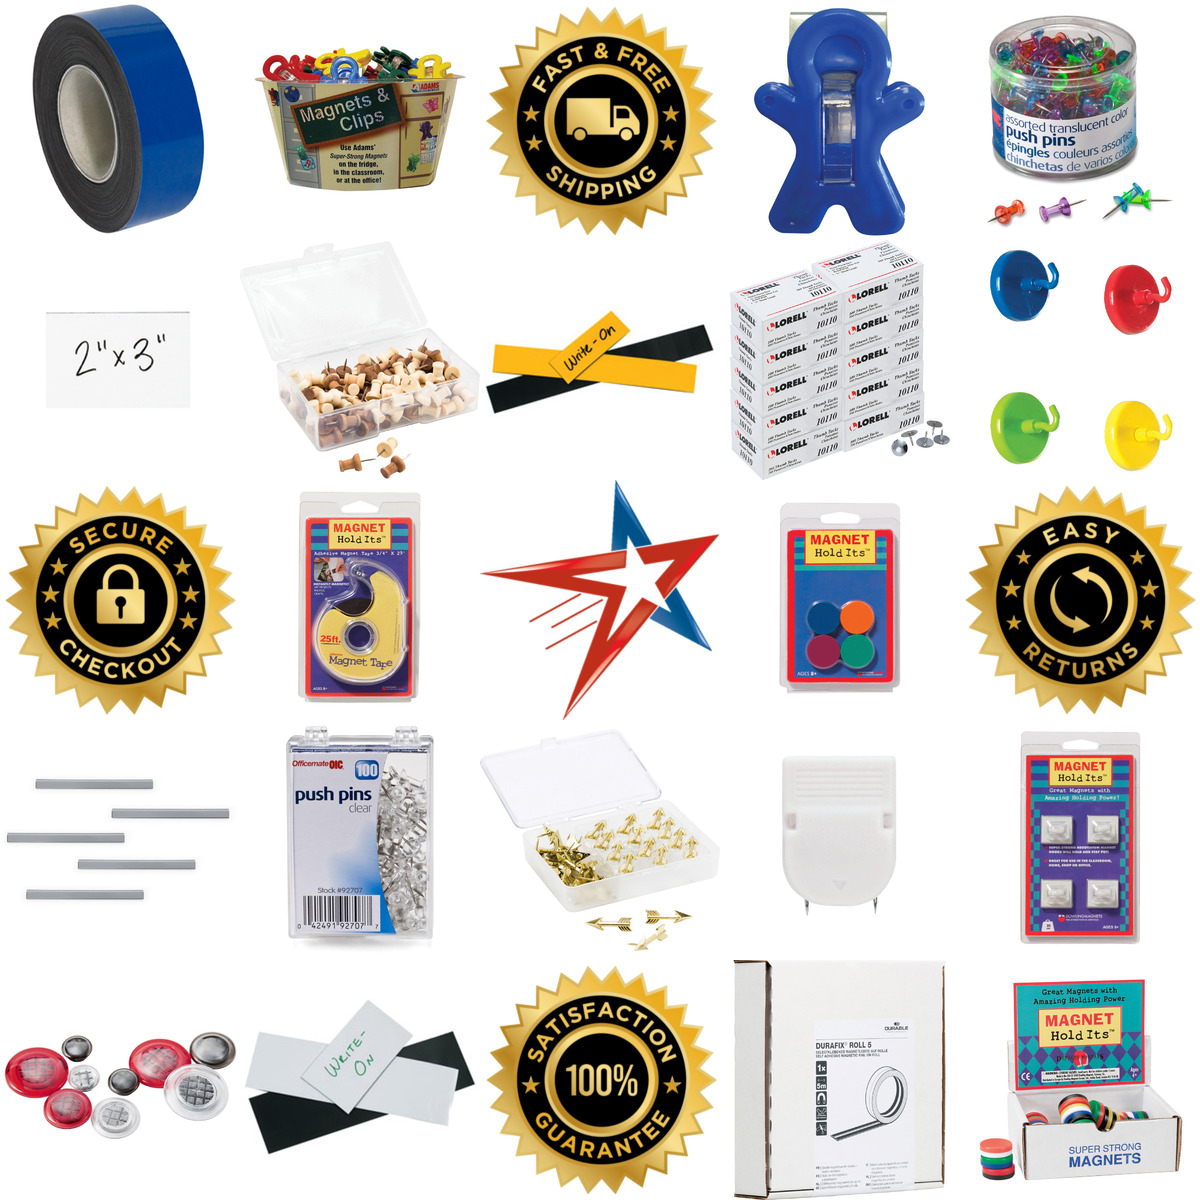 A selection of Magnets Tacks and Push Pins products on GoVets